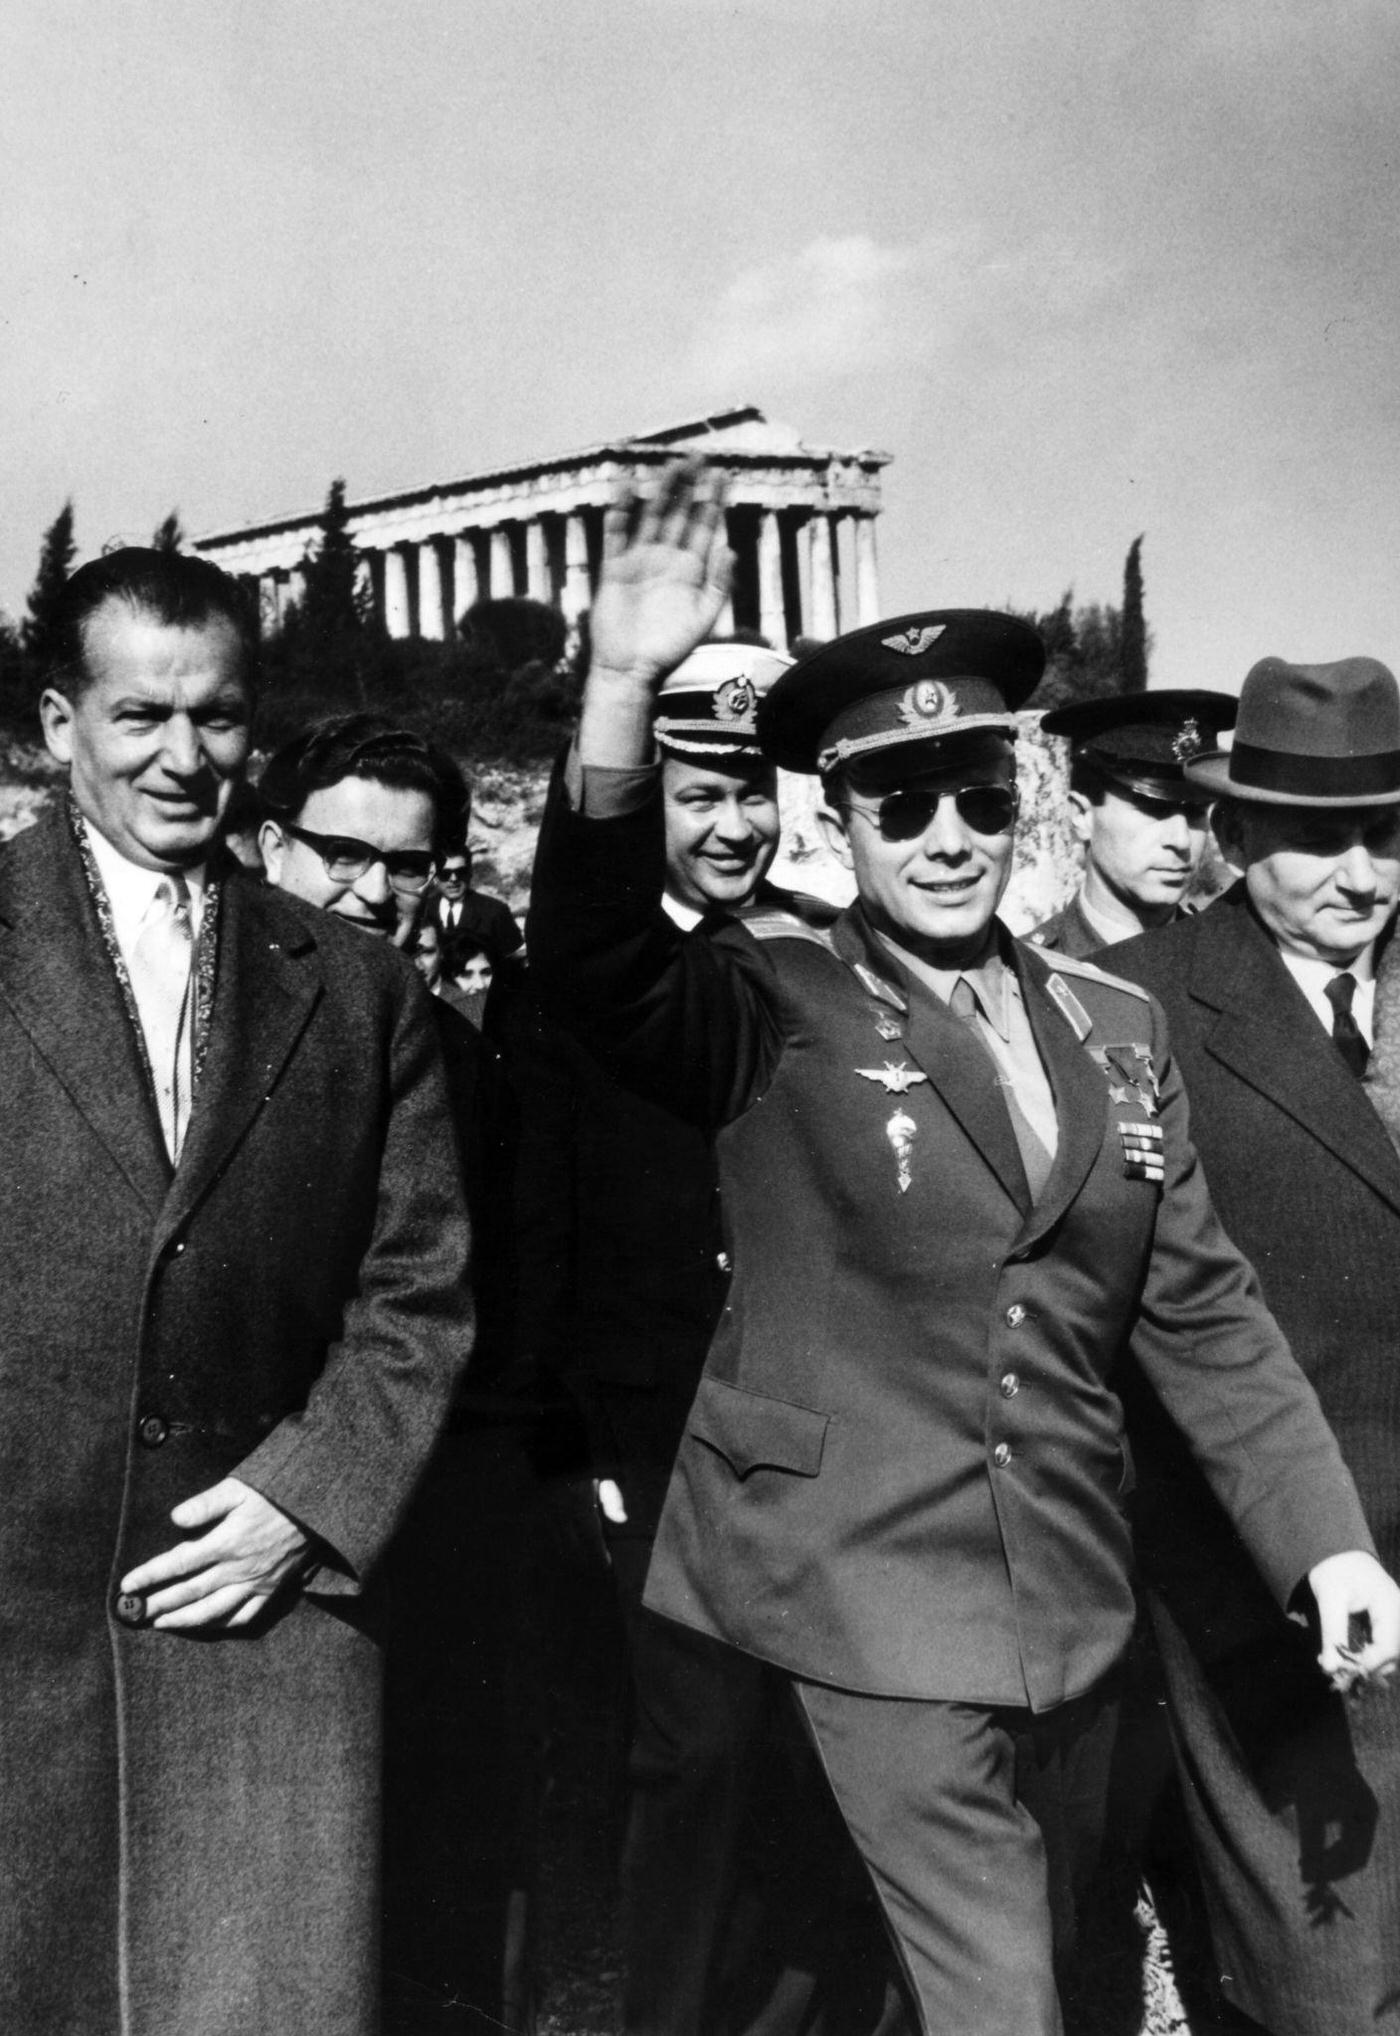 Yuri Gagarin, waving as he tours the historical sights of Greece while on goodwill trip.